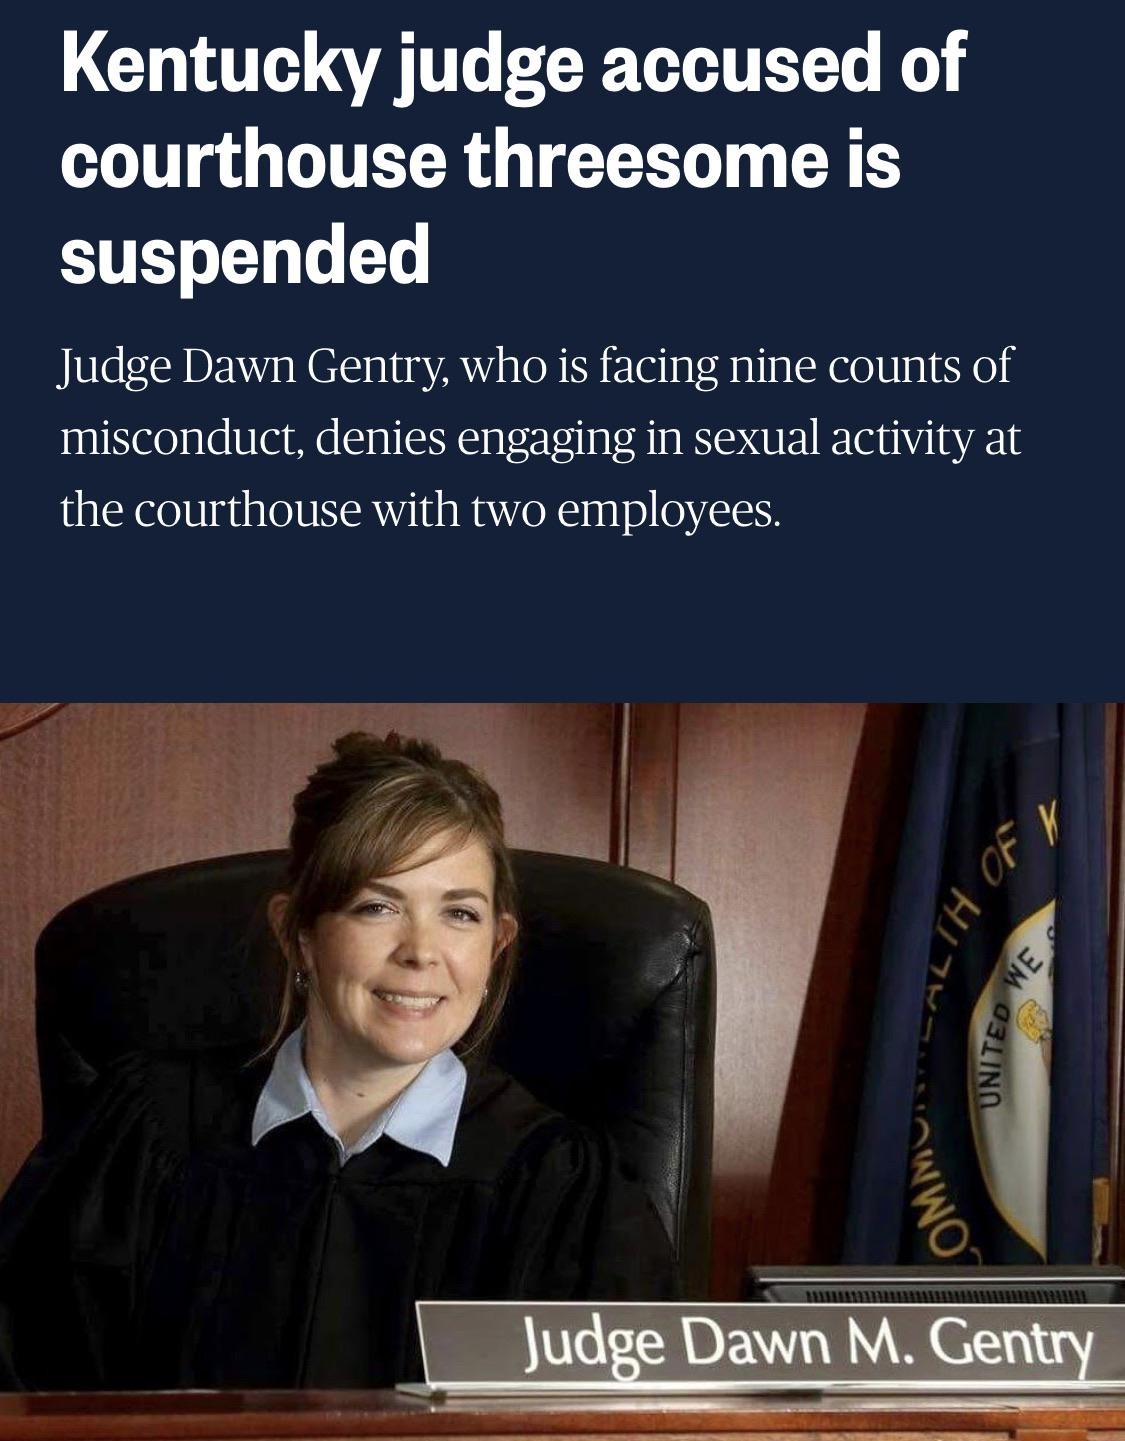 kentucky judge dawn gentry - Kentucky judge accused of courthouse threesome is suspended Judge Dawn Gentry, who is facing nine counts of misconduct, denies engaging in sexual activity at the courthouse with two employees. Lth Of United W Ced We Judge Dawn